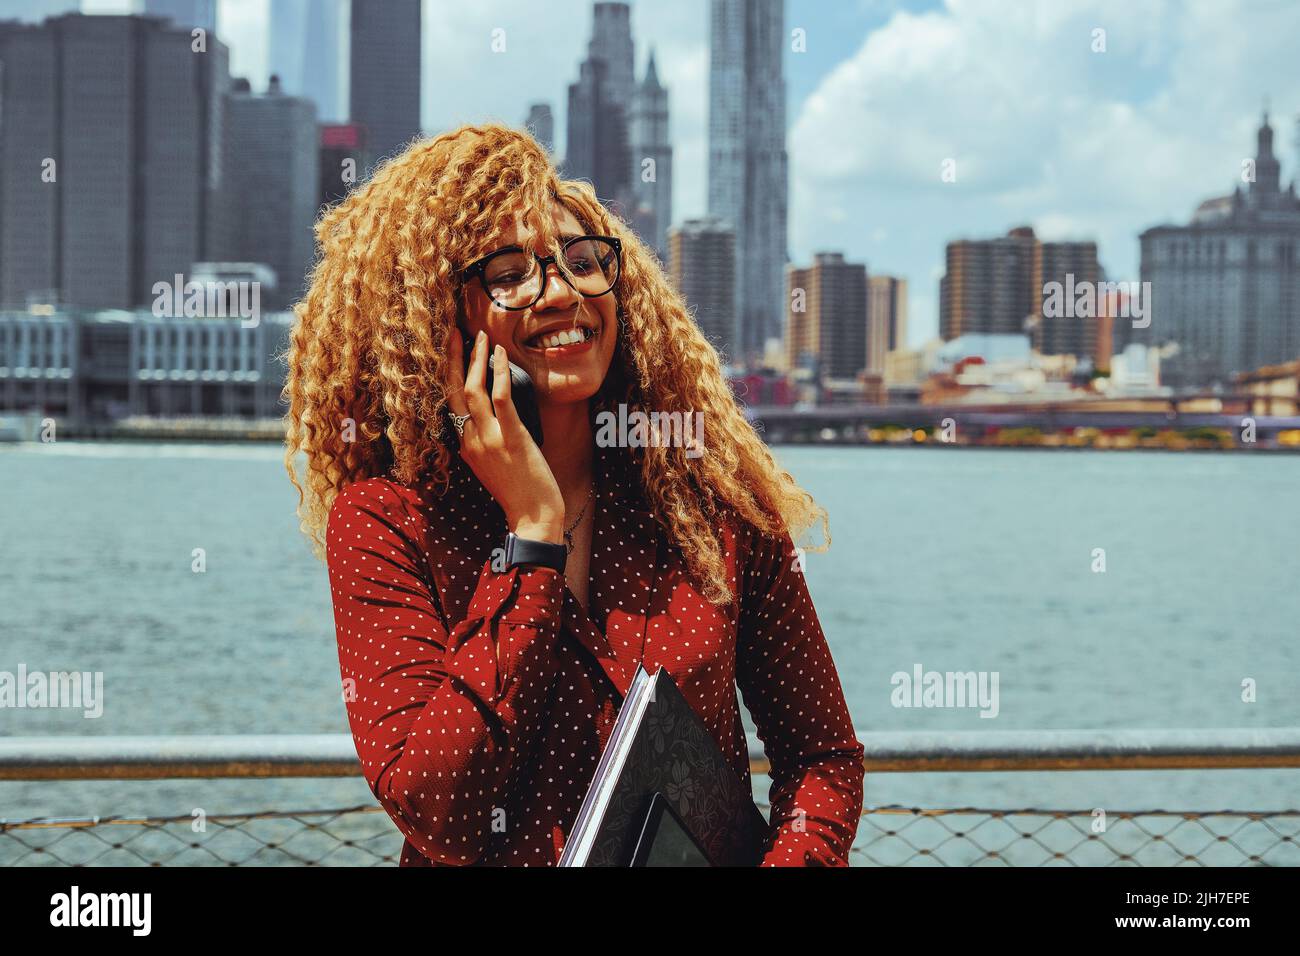 Portrait young adult entrepreneur millennial woman with eyeglasses and afro hair talking smiling on a phone call outdoors with Manhattan New York City skyline behind Hudson river Stock Photo